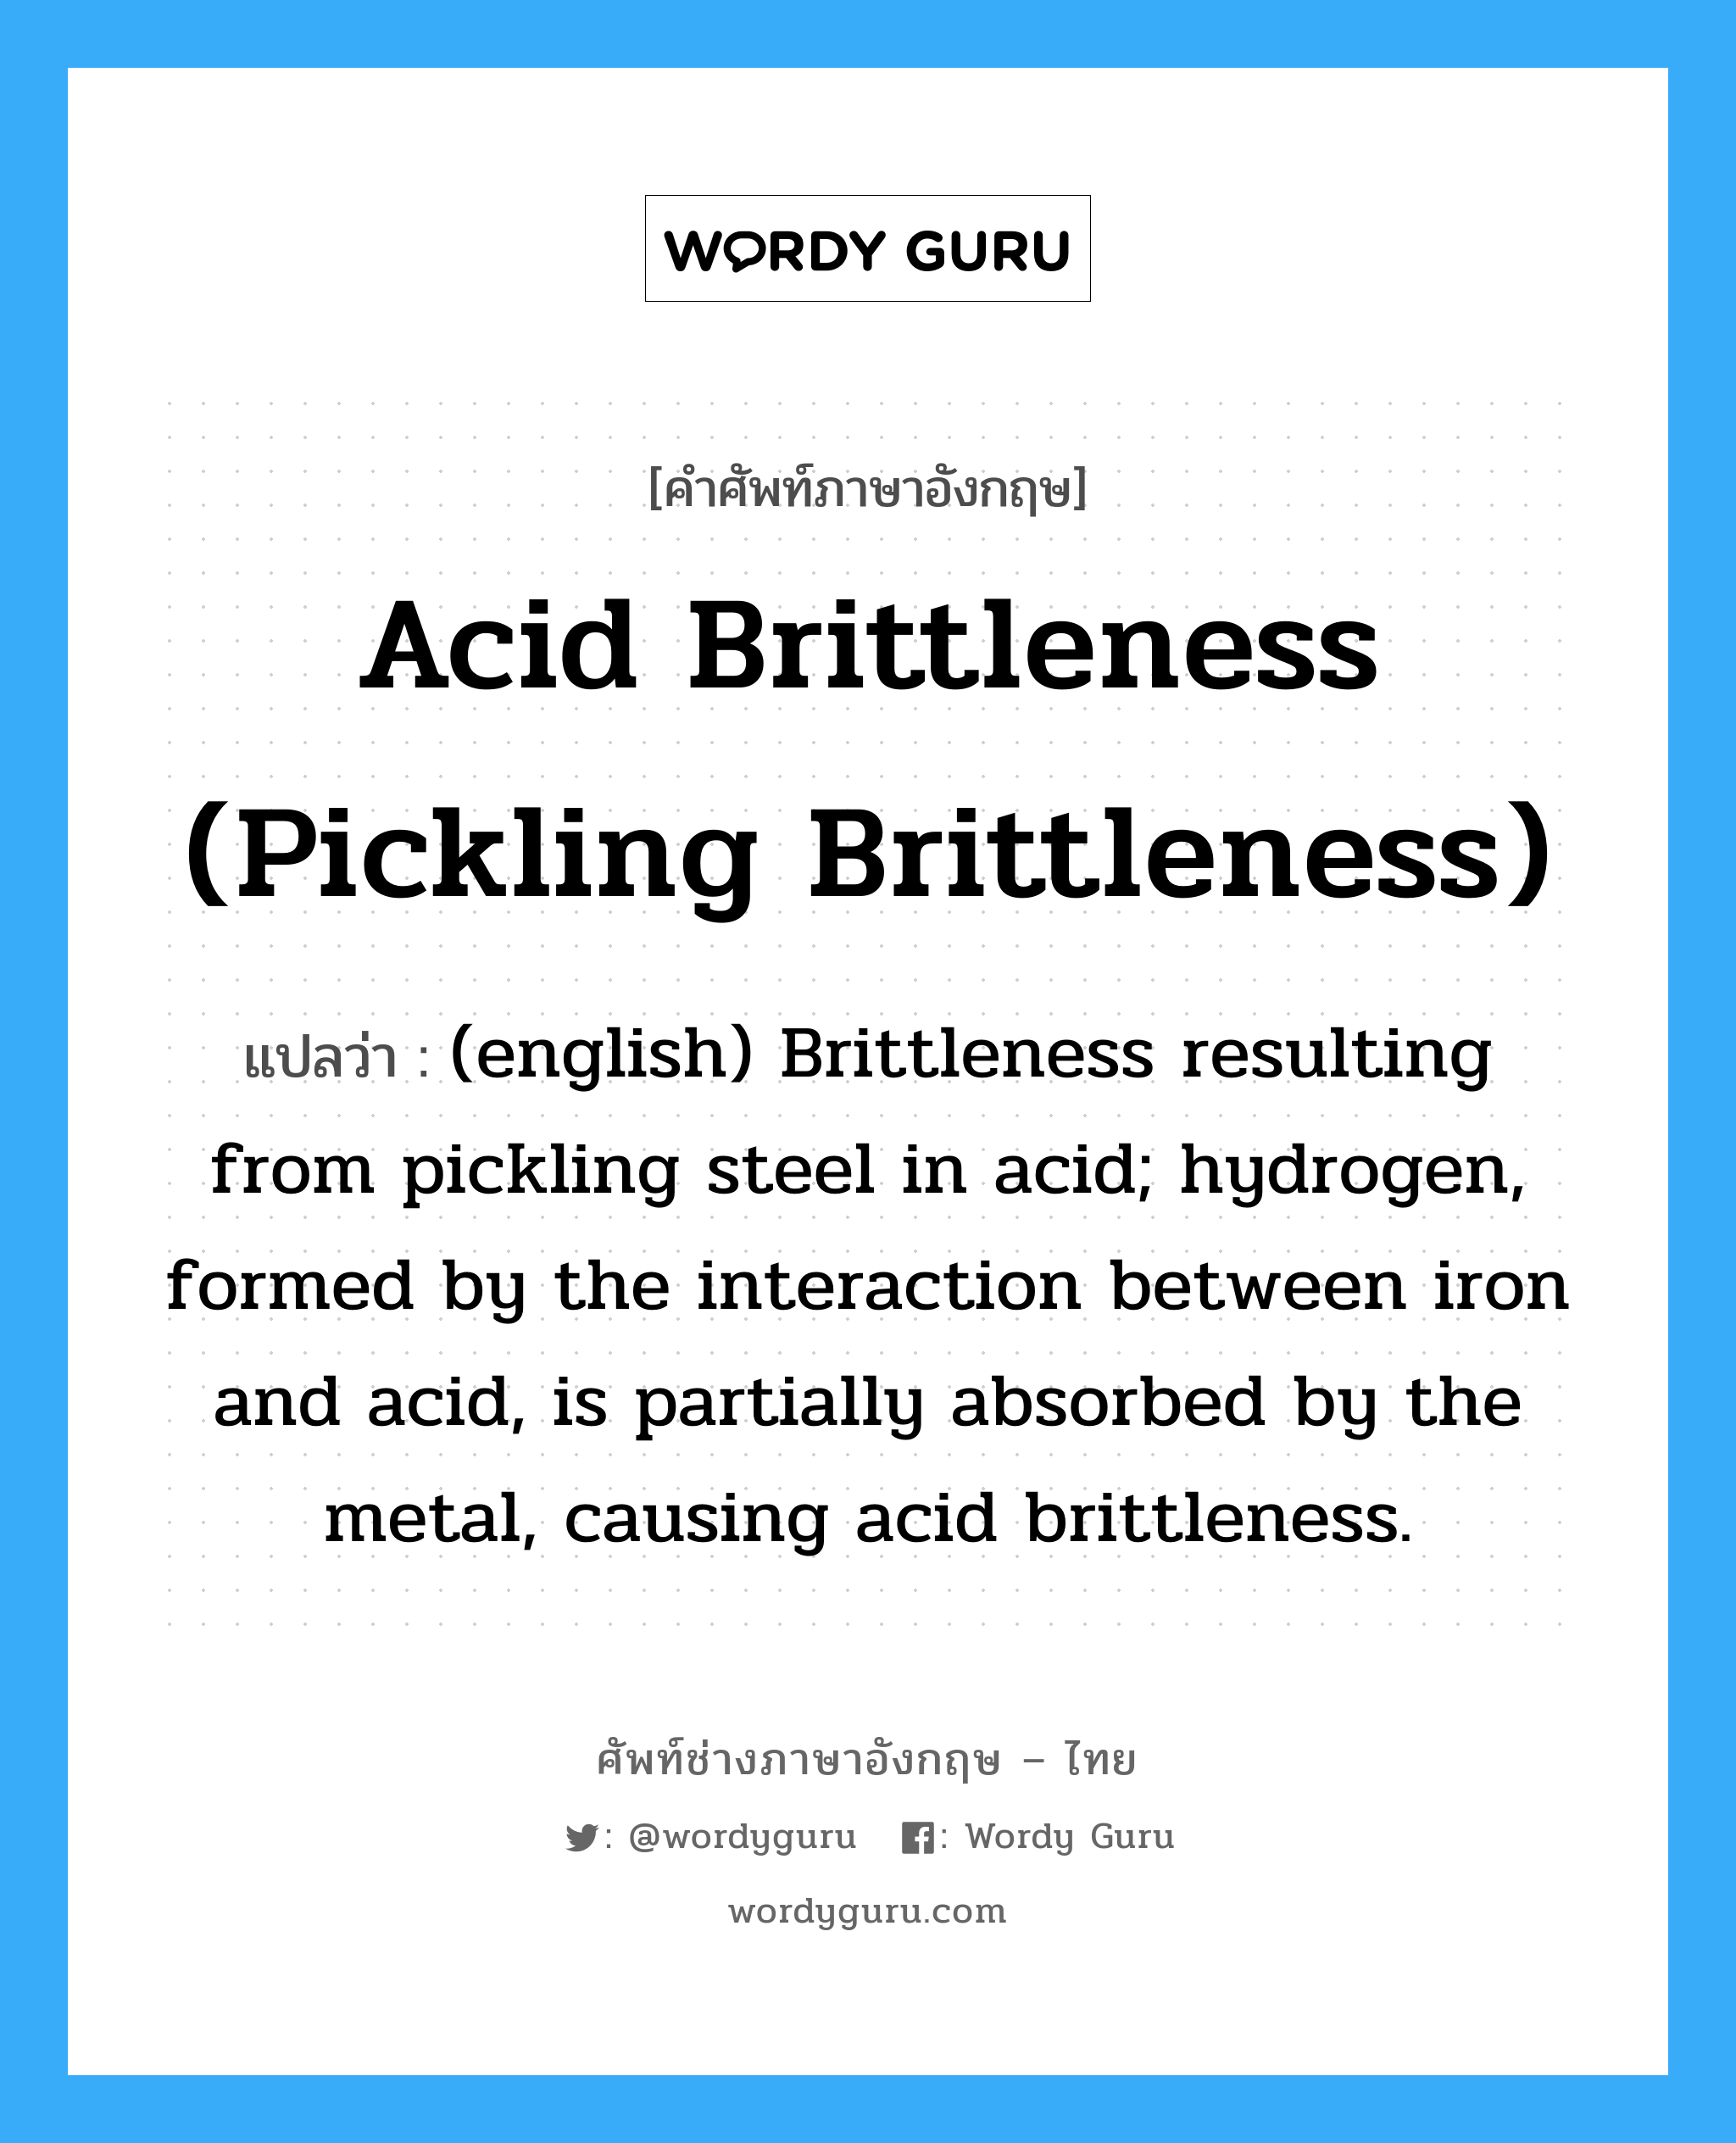 (english) Brittleness resulting from pickling steel in acid; hydrogen, formed by the interaction between iron and acid, is partially absorbed by the metal, causing acid brittleness. ภาษาอังกฤษ?, คำศัพท์ช่างภาษาอังกฤษ - ไทย (english) Brittleness resulting from pickling steel in acid; hydrogen, formed by the interaction between iron and acid, is partially absorbed by the metal, causing acid brittleness. คำศัพท์ภาษาอังกฤษ (english) Brittleness resulting from pickling steel in acid; hydrogen, formed by the interaction between iron and acid, is partially absorbed by the metal, causing acid brittleness. แปลว่า Acid Brittleness (Pickling Brittleness)